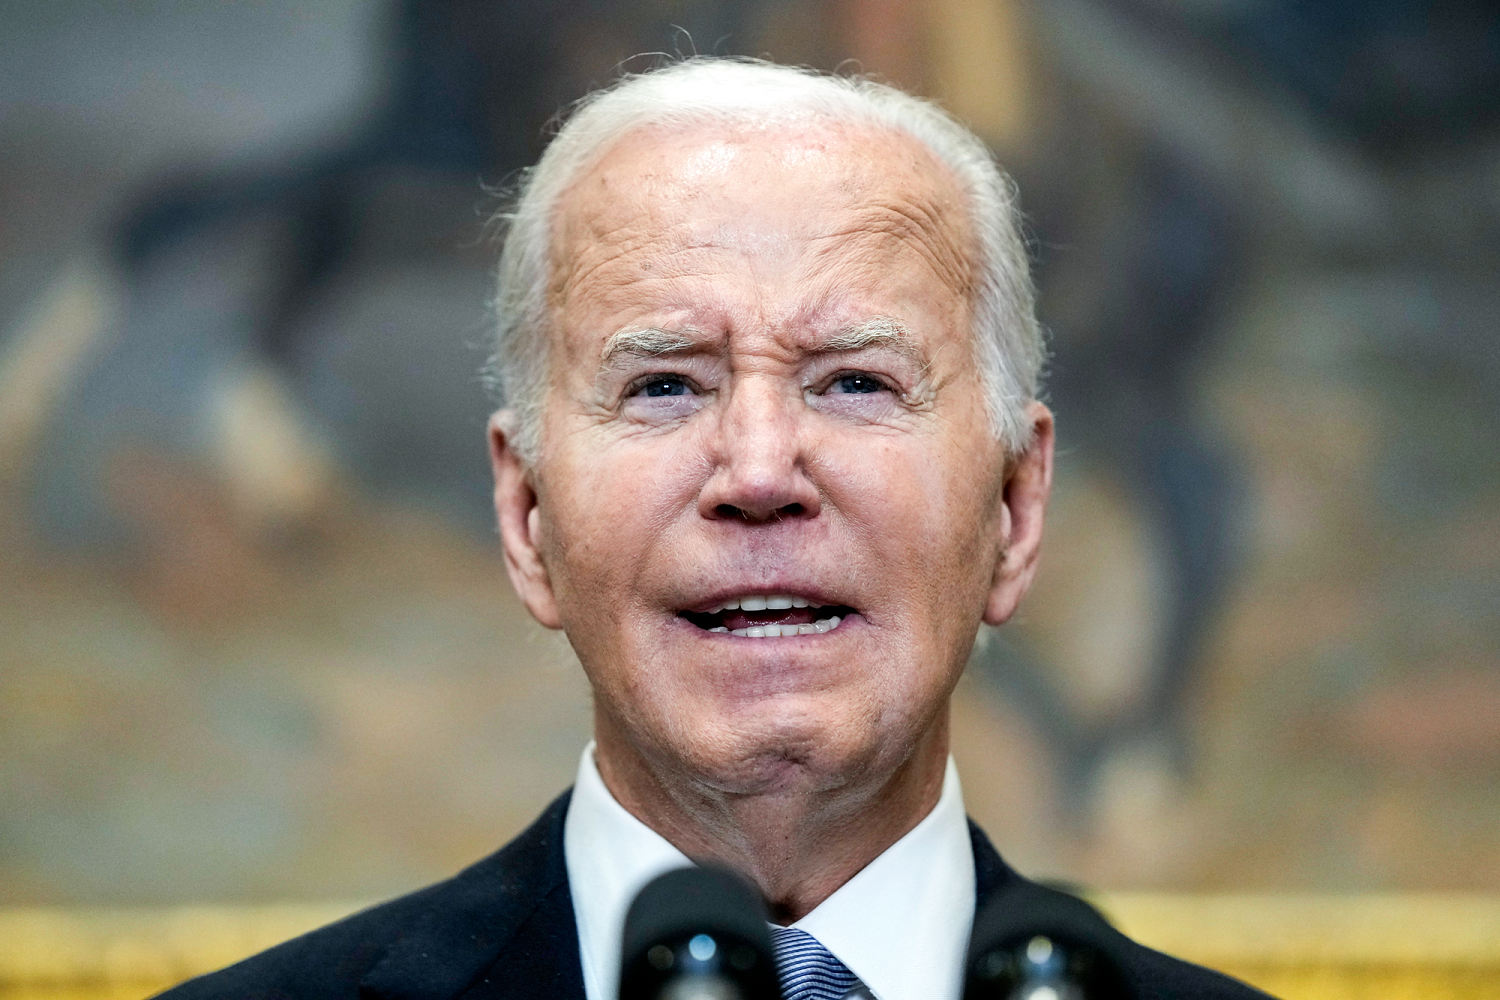 Determined to push forward, Biden tightens his circle and grows combative